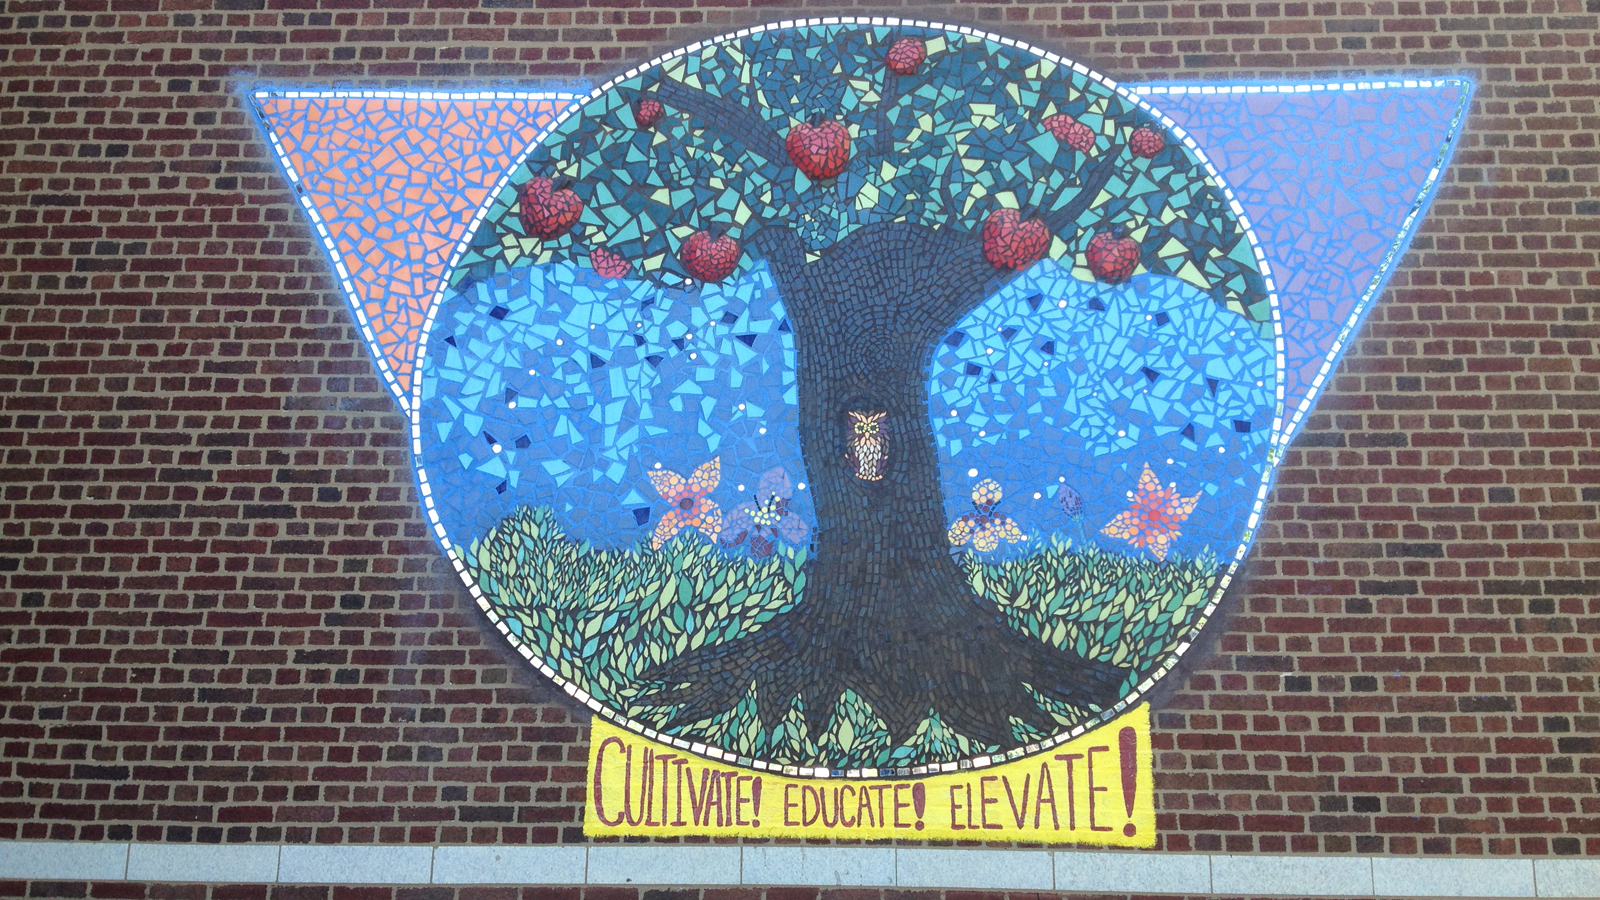 One of three murals created by students at Horace Mann Academy to send a positive message about their community. (Credit: Bernie Tafoya/CBS)